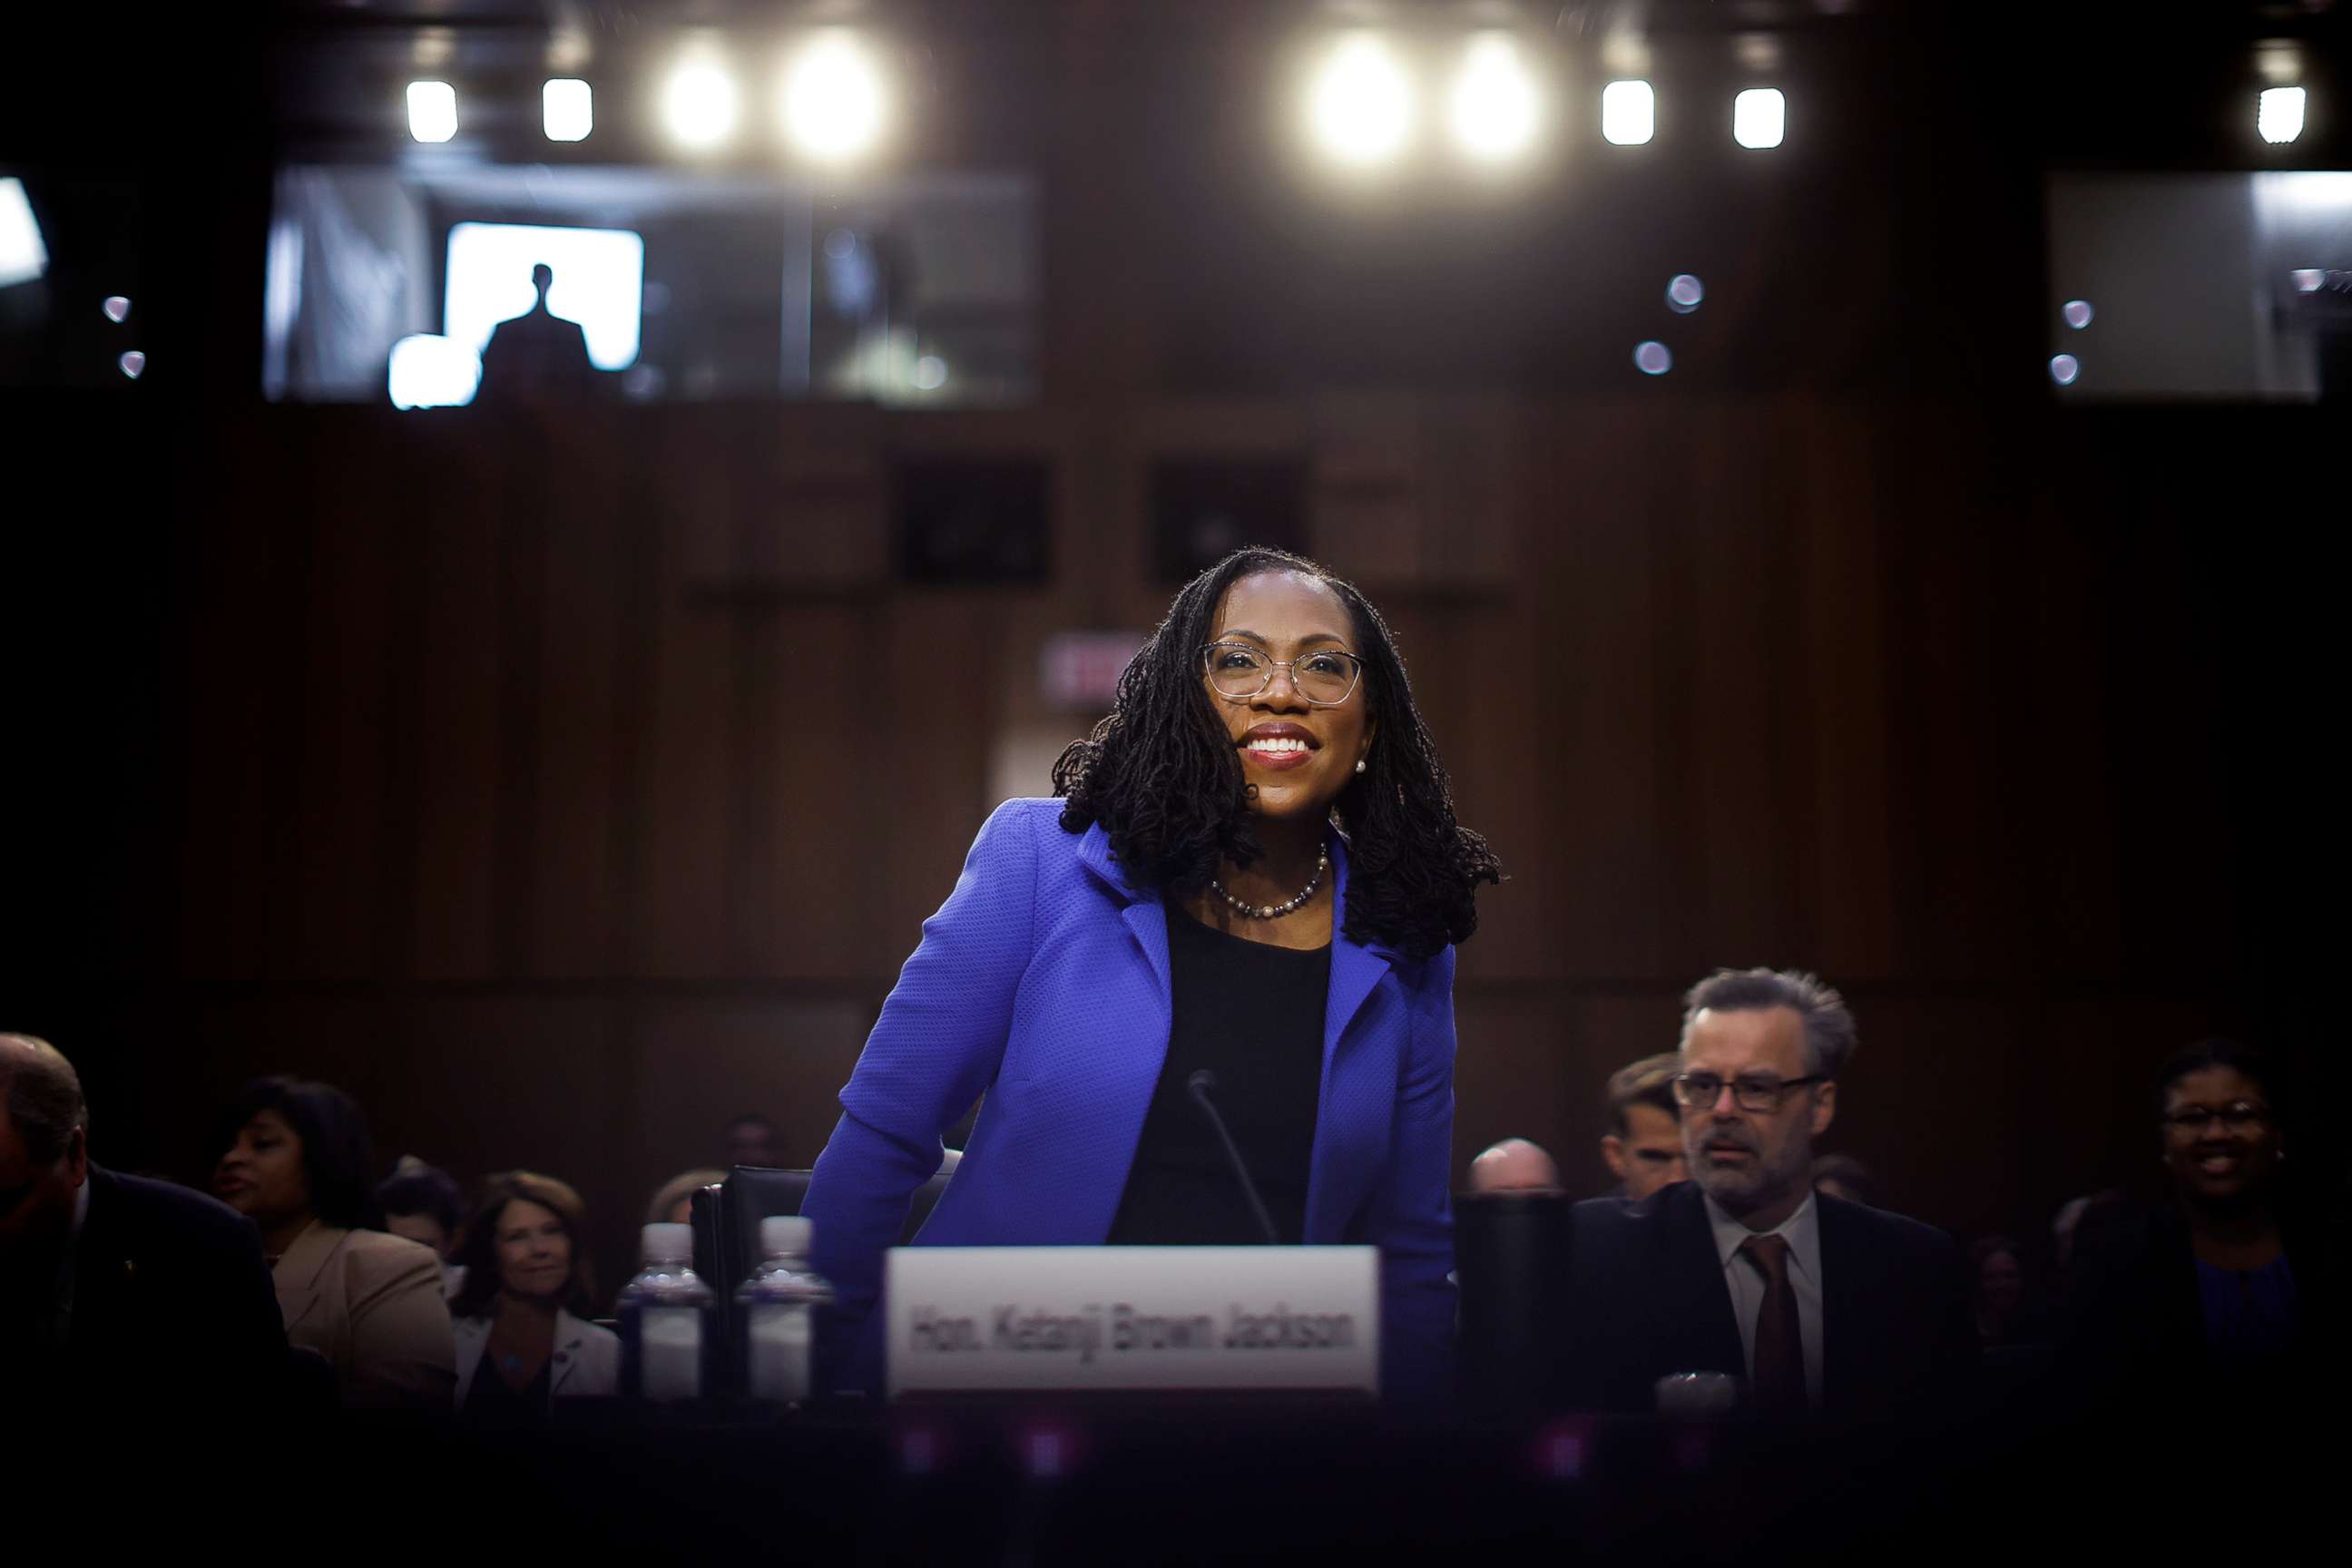 PHOTO: Supreme Court nominee Judge Ketanji Brown Jackson arrives for the third day of her confirmation hearing before the Senate Judiciary Committee on Capitol Hill, March 23, 2022, in Washington, D.C. 